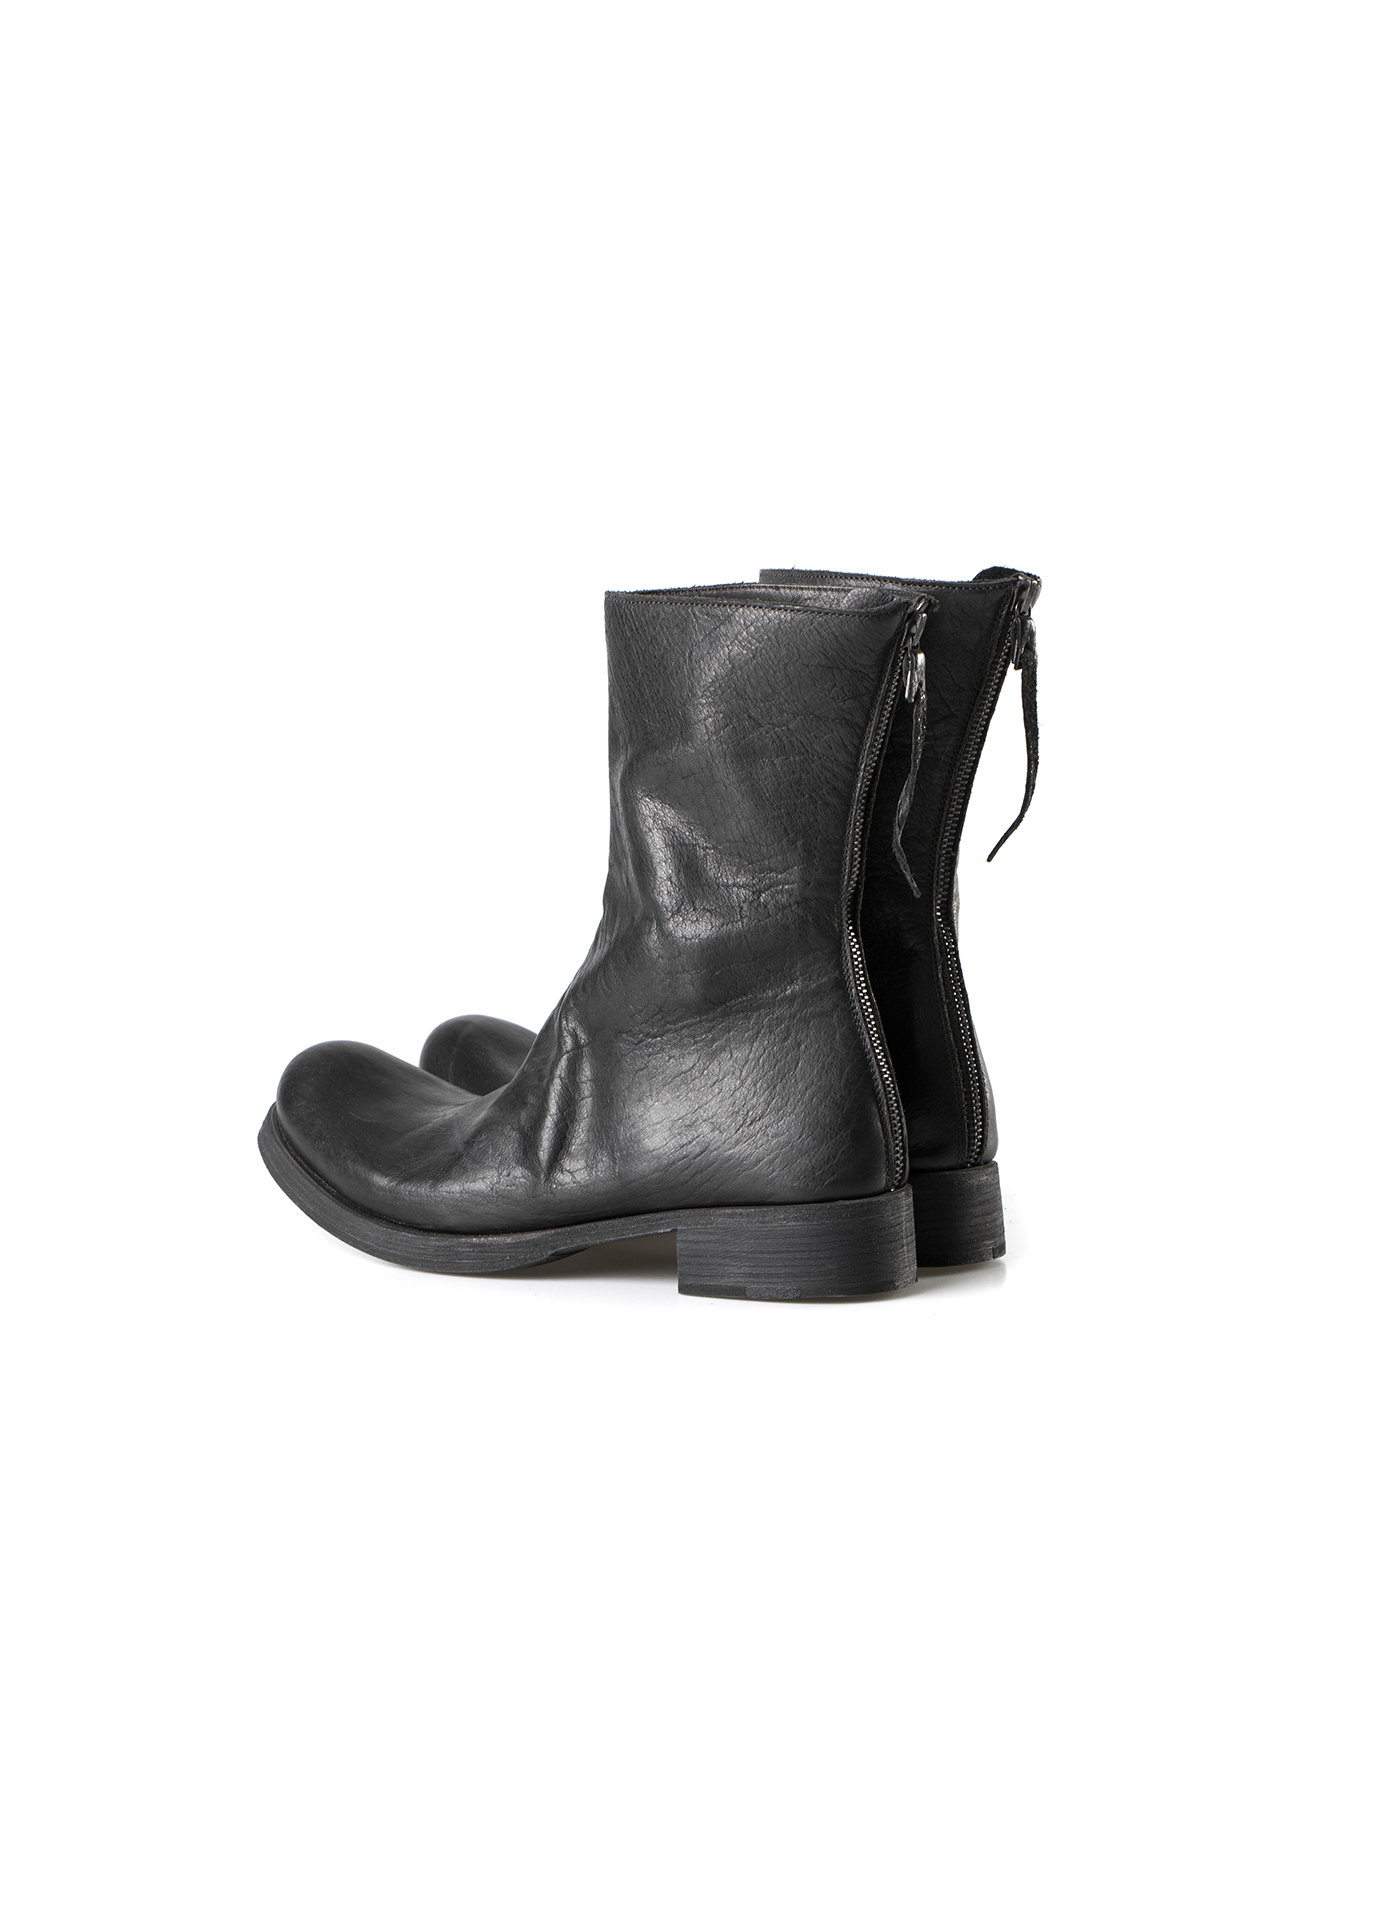 bison leather zip boot